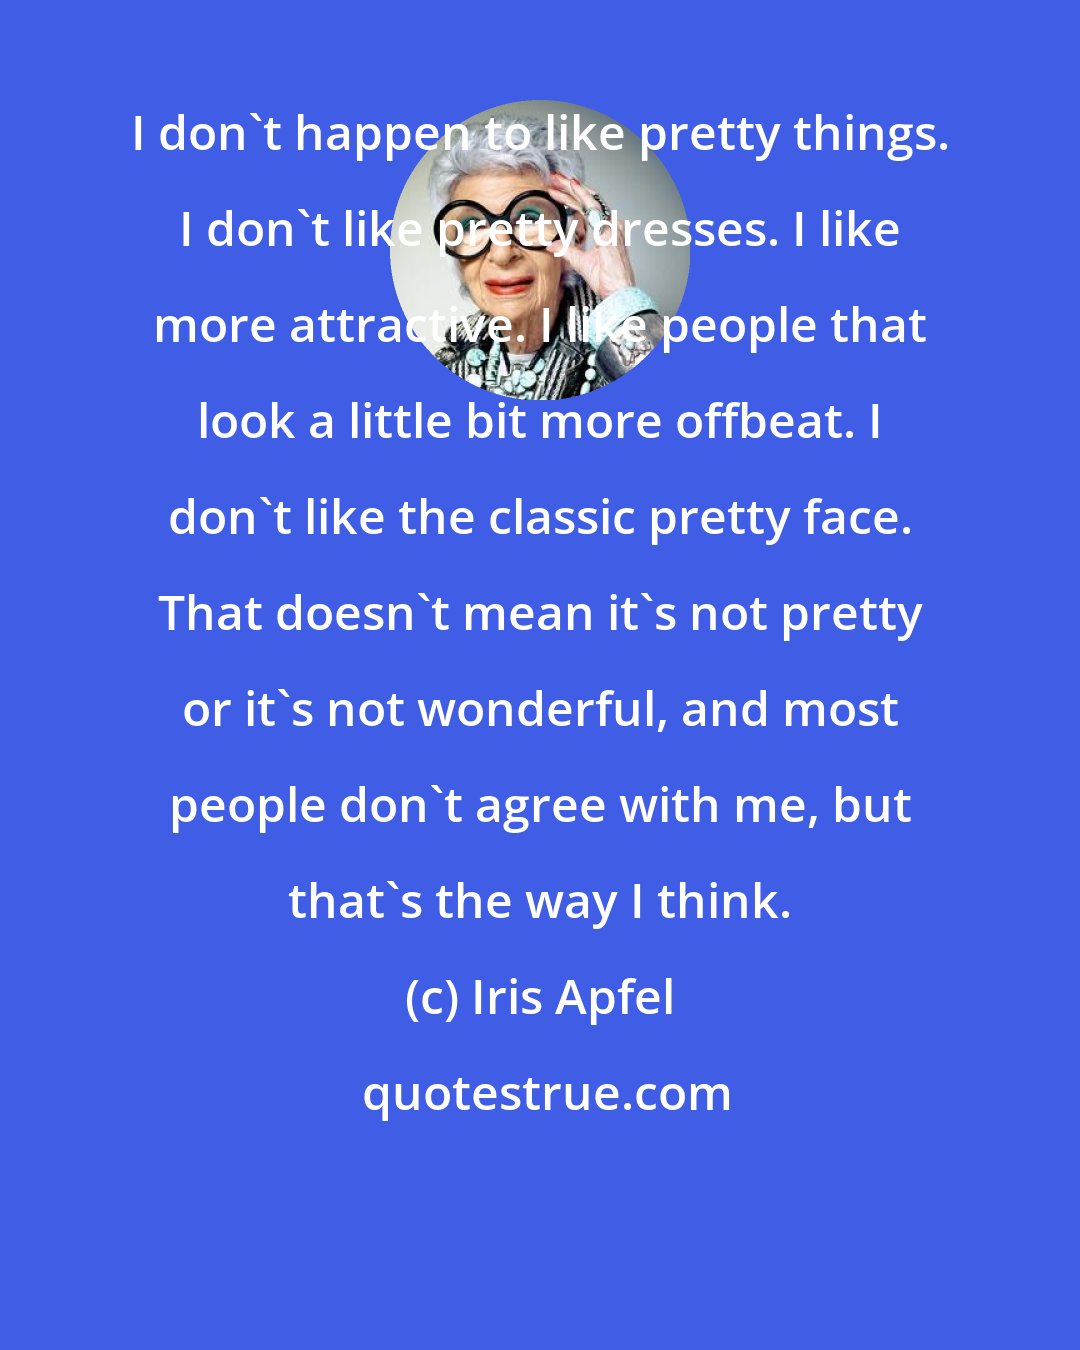 Iris Apfel: I don't happen to like pretty things. I don't like pretty dresses. I like more attractive. I like people that look a little bit more offbeat. I don't like the classic pretty face. That doesn't mean it's not pretty or it's not wonderful, and most people don't agree with me, but that's the way I think.